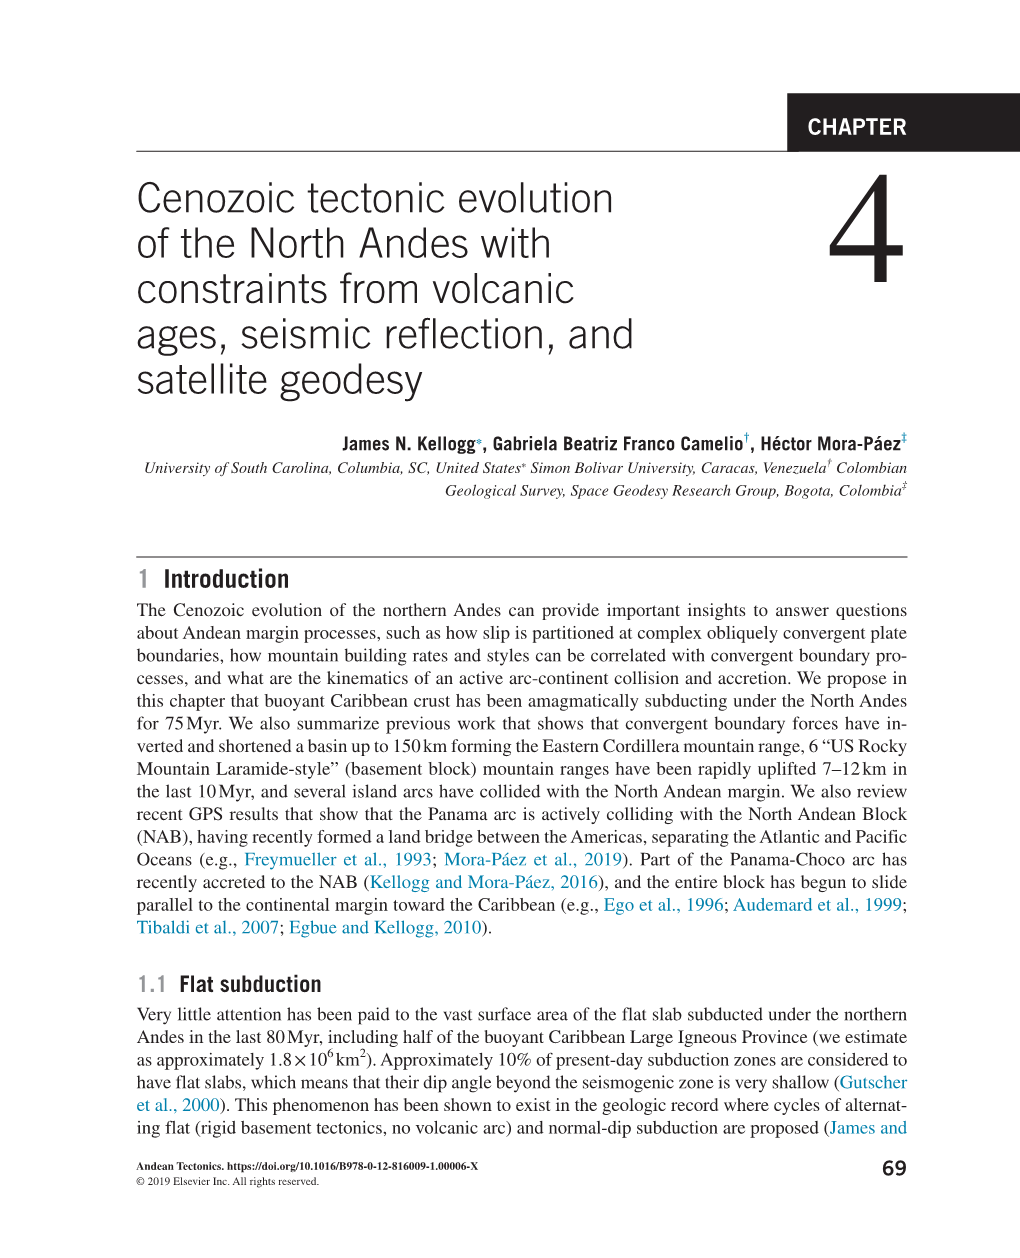 Cenozoic Tectonic Evolution of the North Andes with Constraints from Volcanic 4 Ages, Seismic Reflection, and Satellite Geodesy